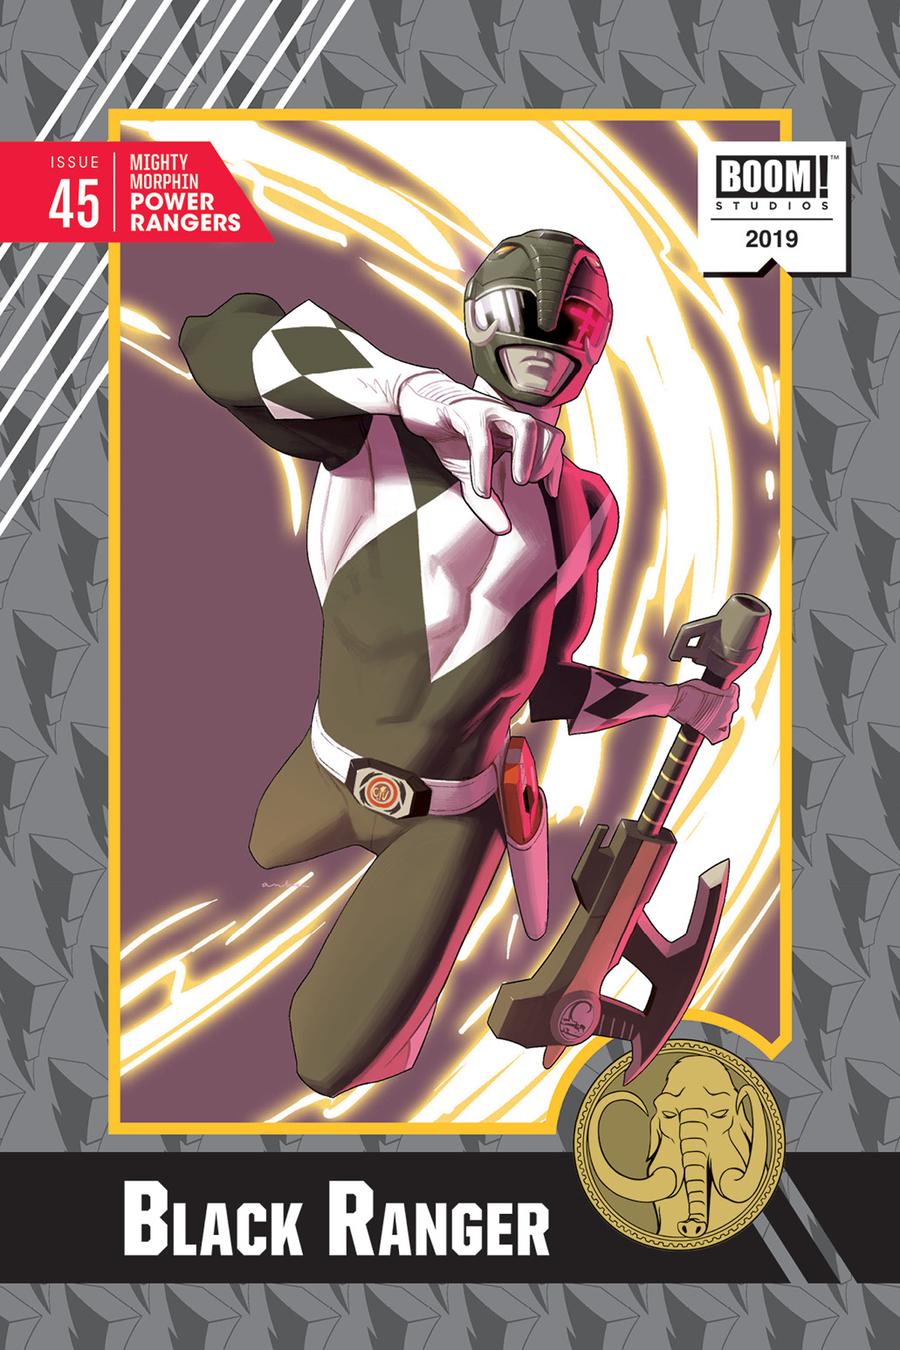 Mighty Morphin Power Rangers (BOOM Studios) #45 Cover D Incentive Kris Anka Variant Cover